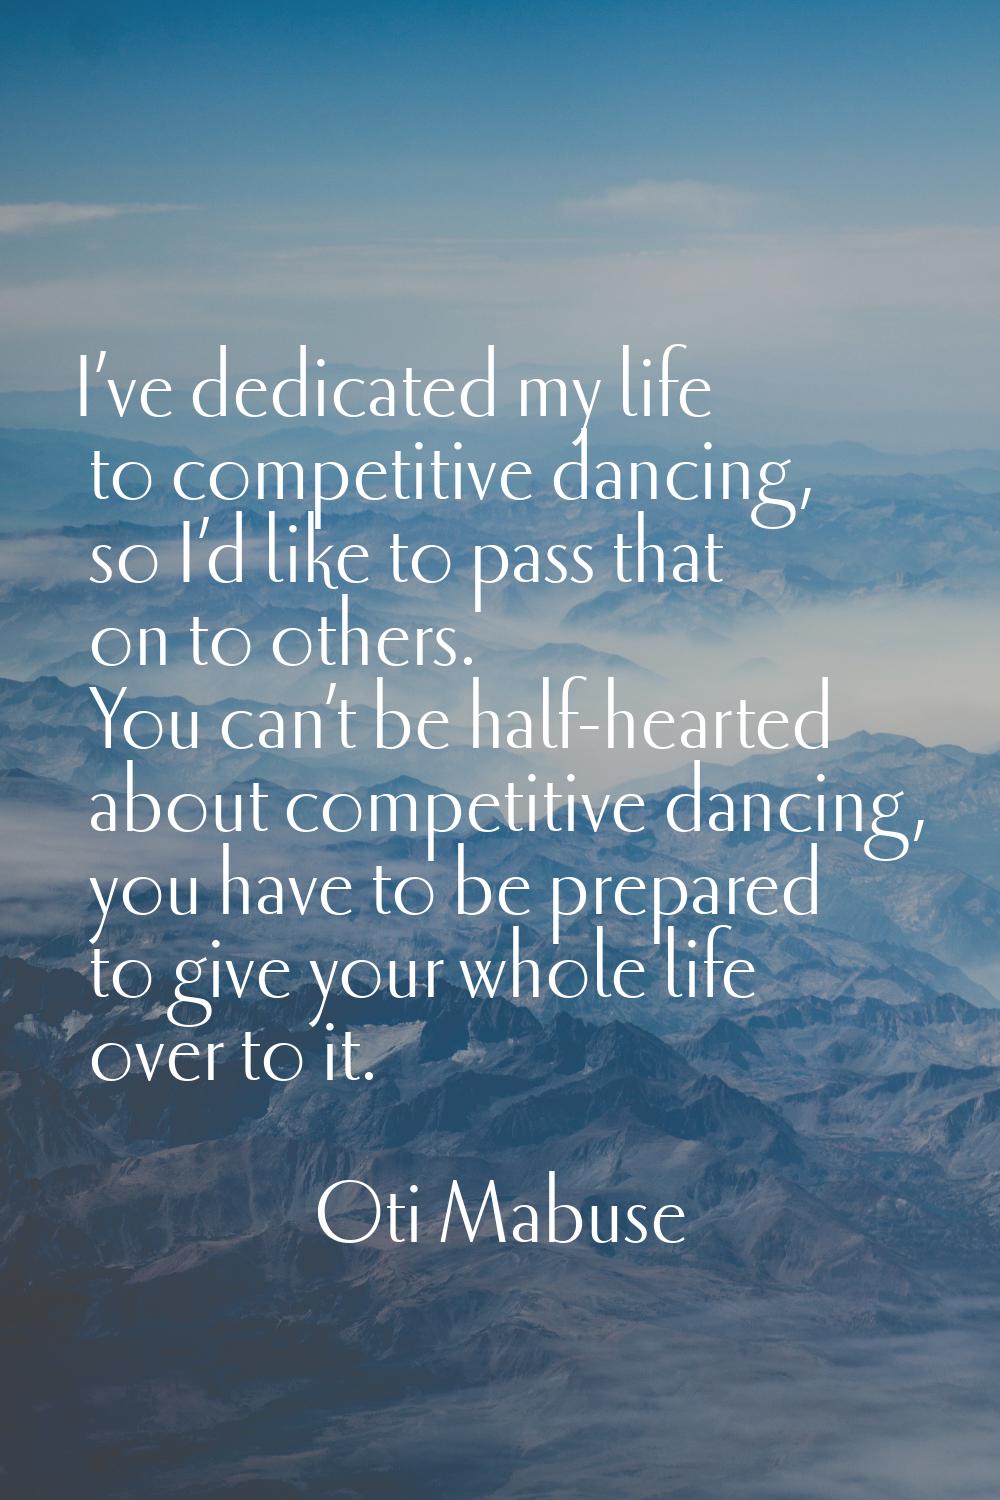 I’ve dedicated my life to competitive dancing, so I’d like to pass that on to others. You can’t be 